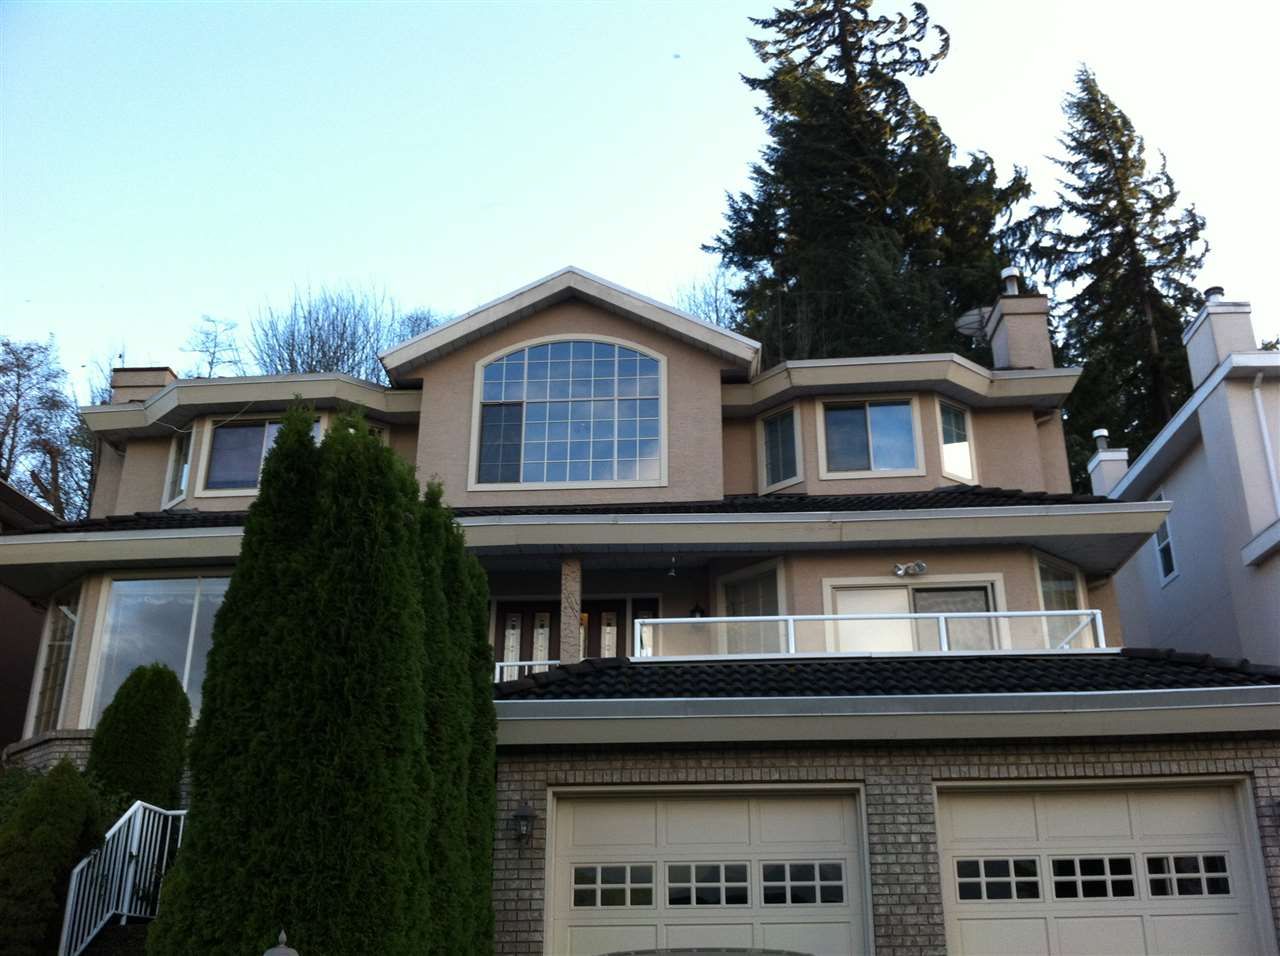 Main Photo: 20 SHORELINE CIRCLE in Port Moody: College Park PM House for sale : MLS®# R2016142